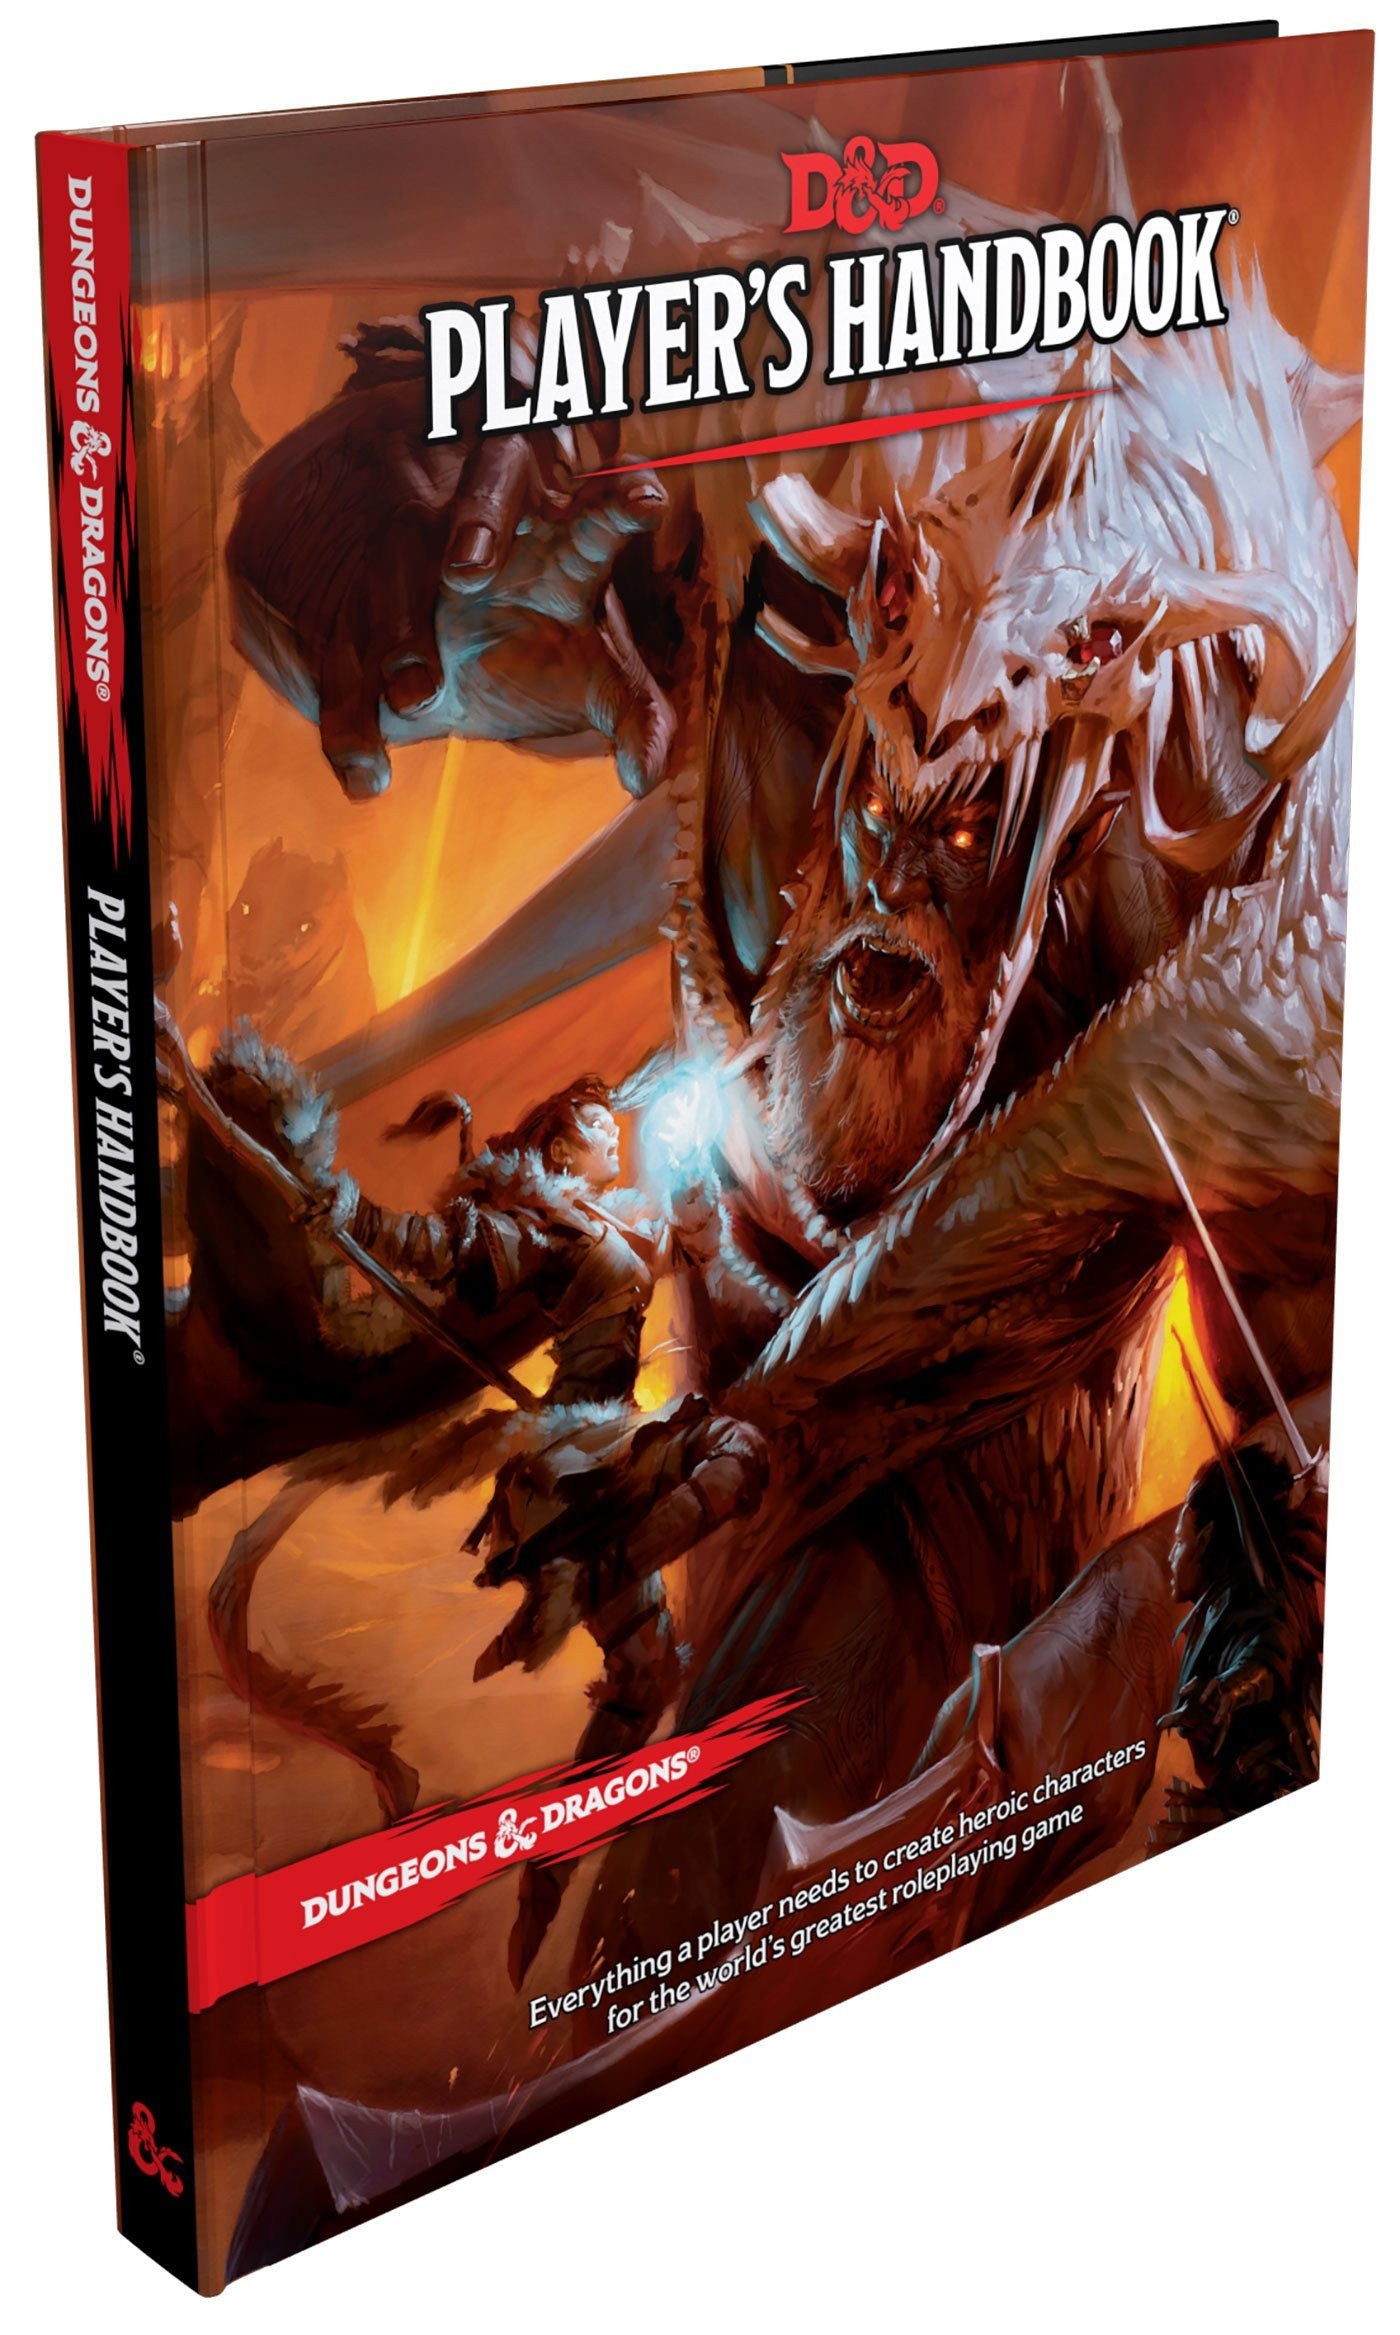 Buy Dungeons & Dragons 5th Edition Player's Handbook (D&D)